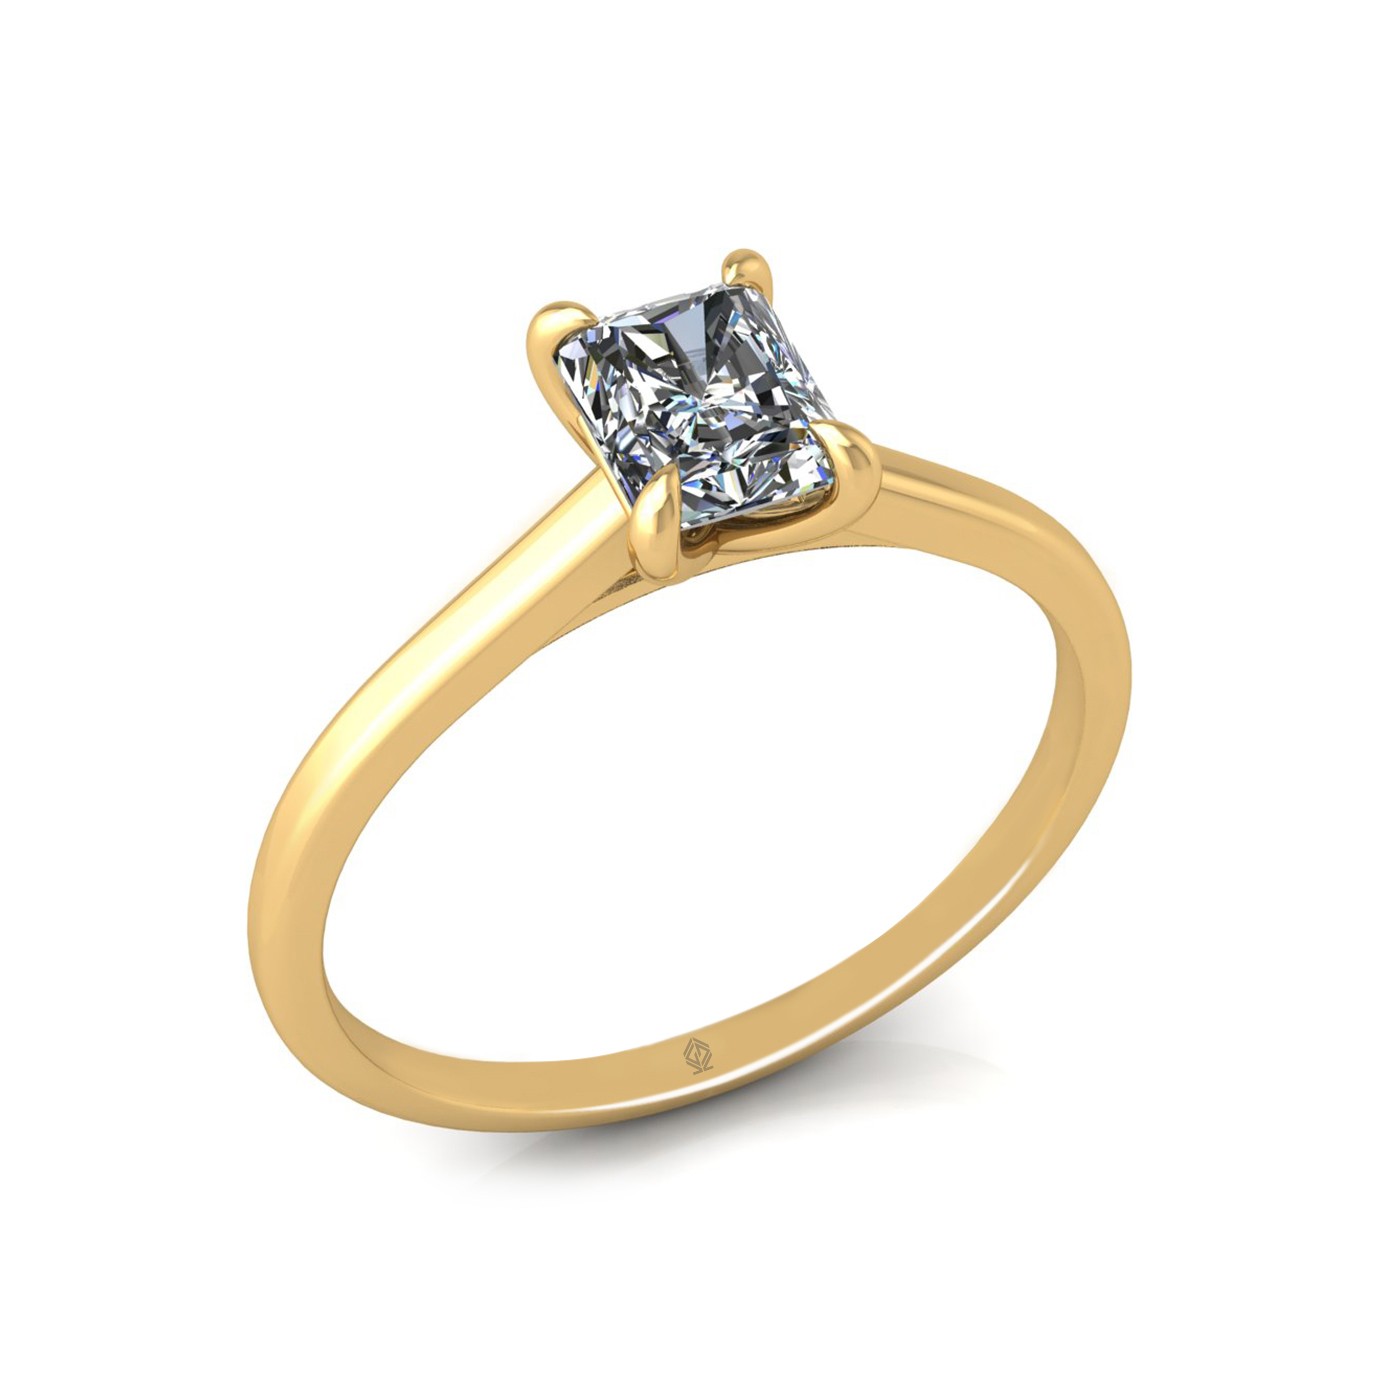 18k yellow gold  0,80 ct 4 prongs solitaire radiant cut diamond engagement ring with whisper thin band